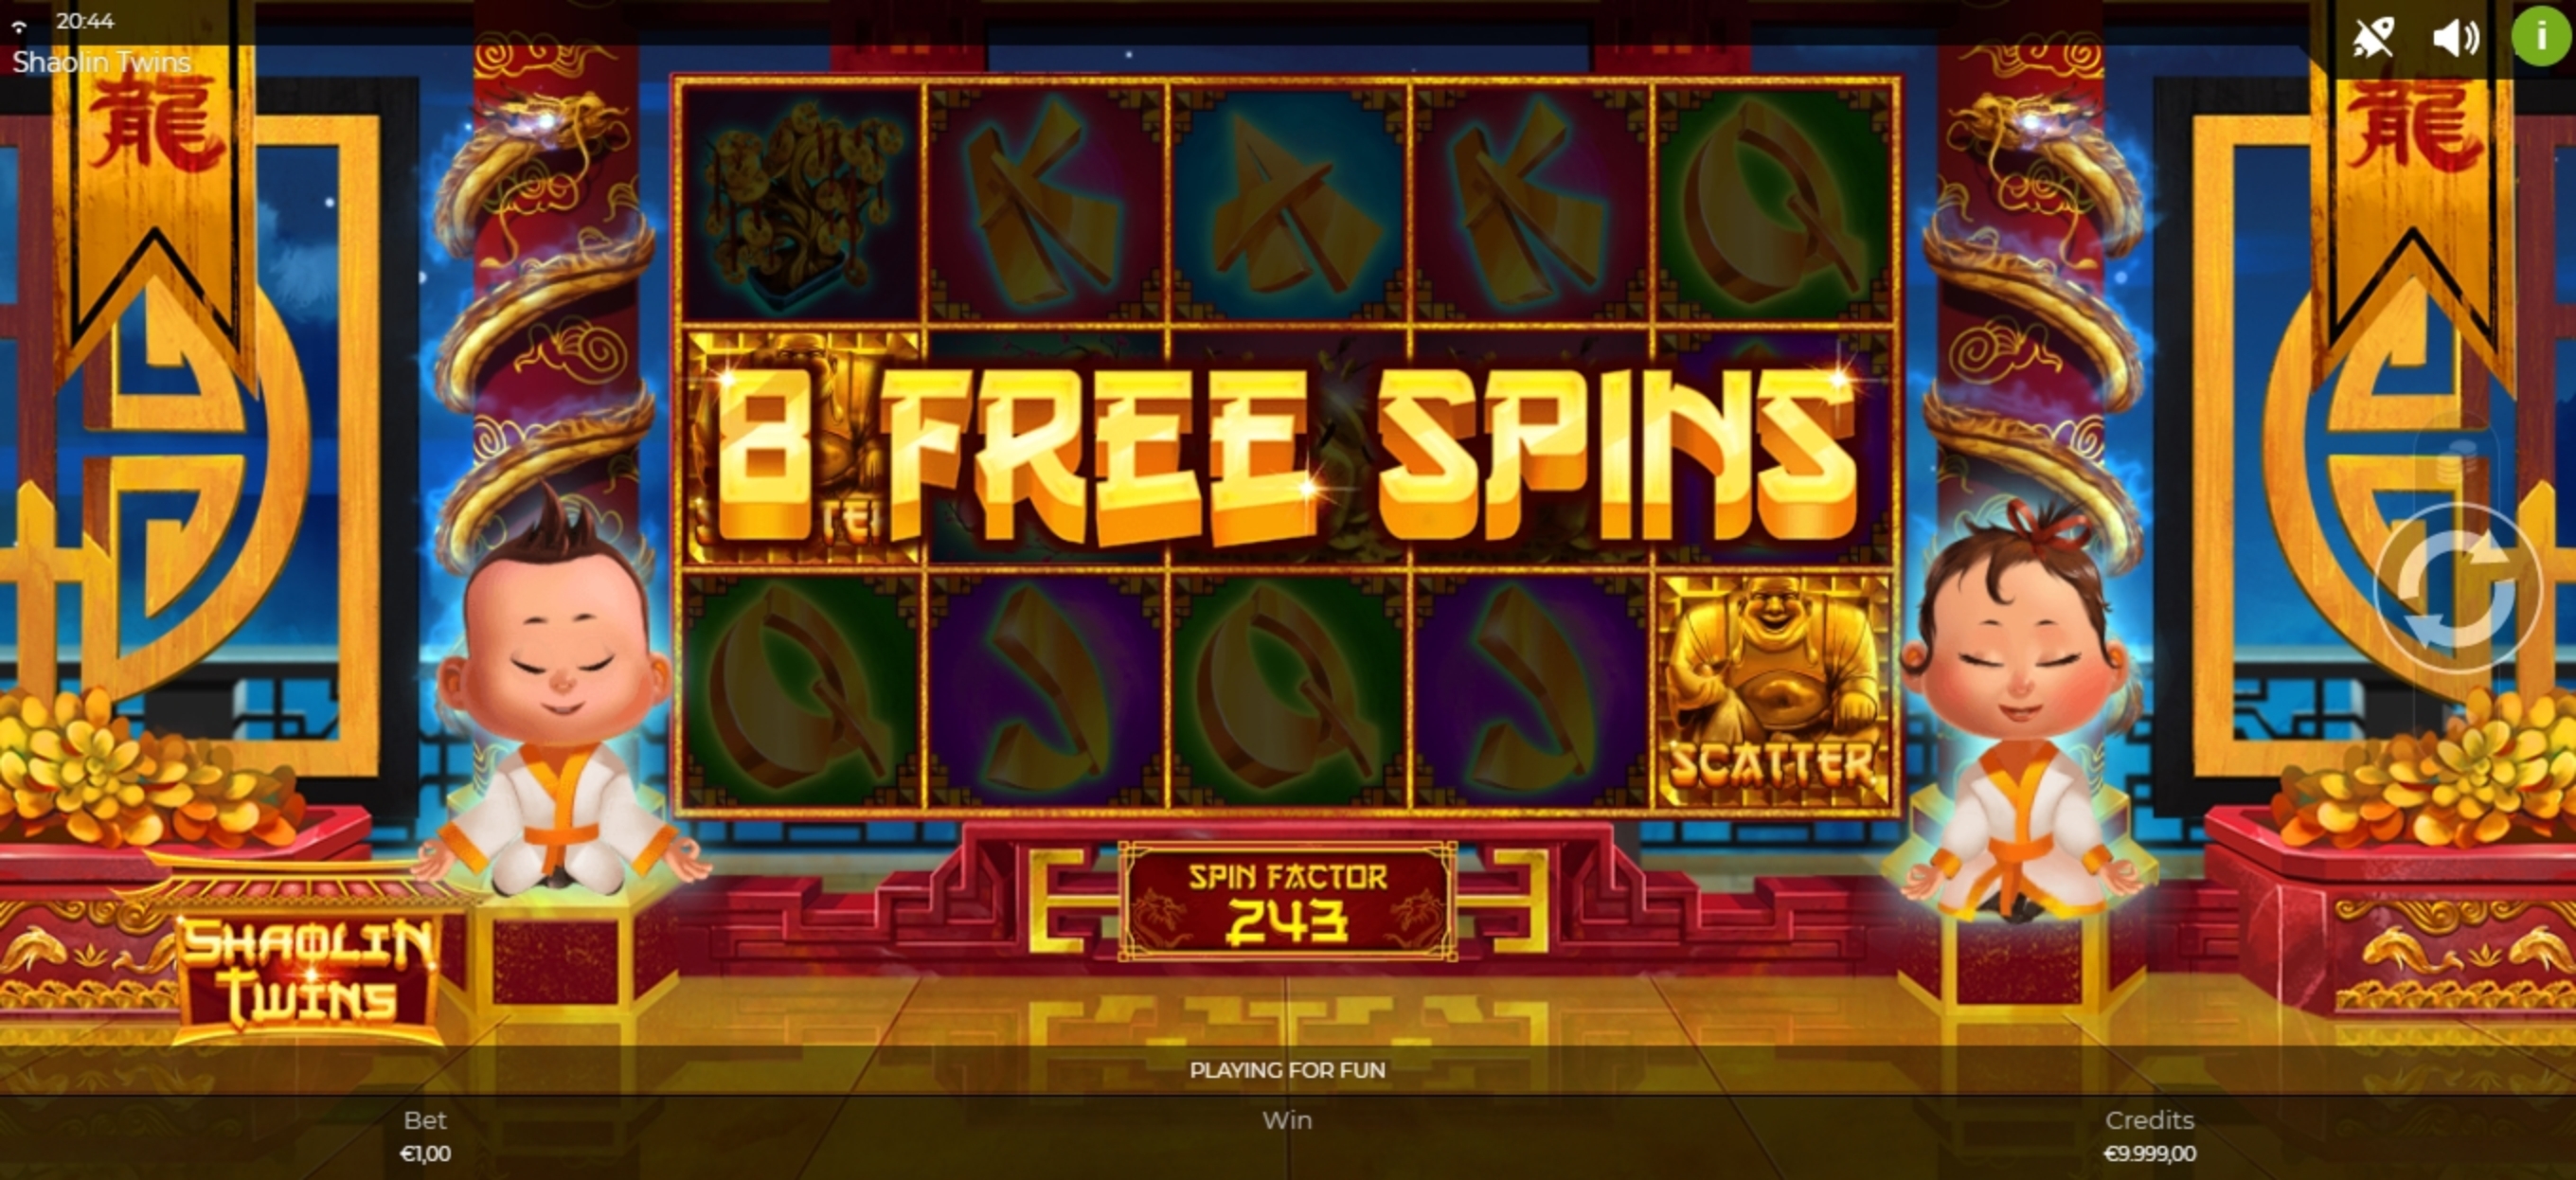 Win Money in Shaolin Twins Free Slot Game by Spinmatic